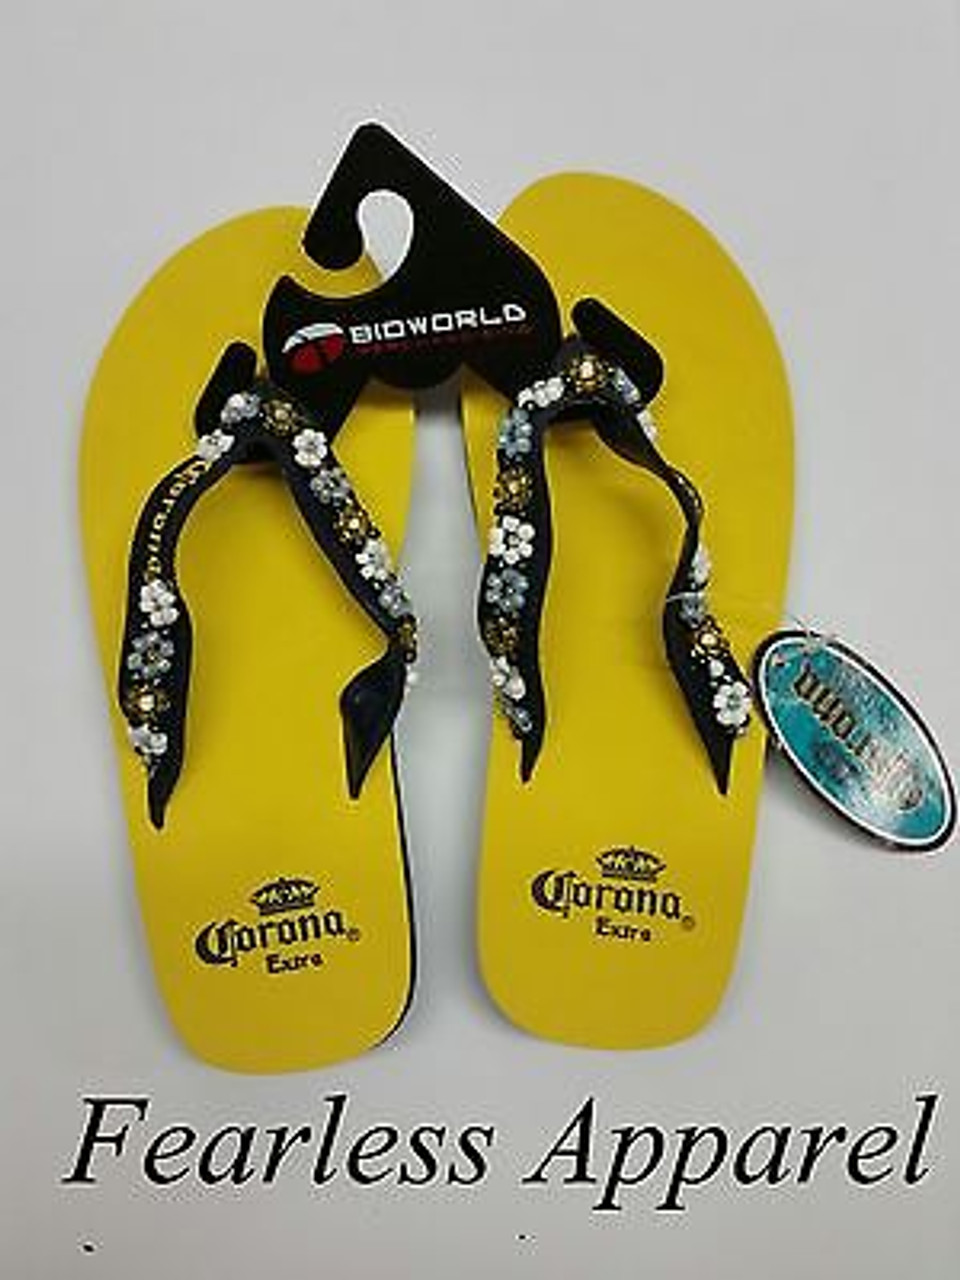 Bioworld Corona Extra Yellow Beer Mexico Sandals Flip Flops Women Us Size 5-7  - Fearless Apparel